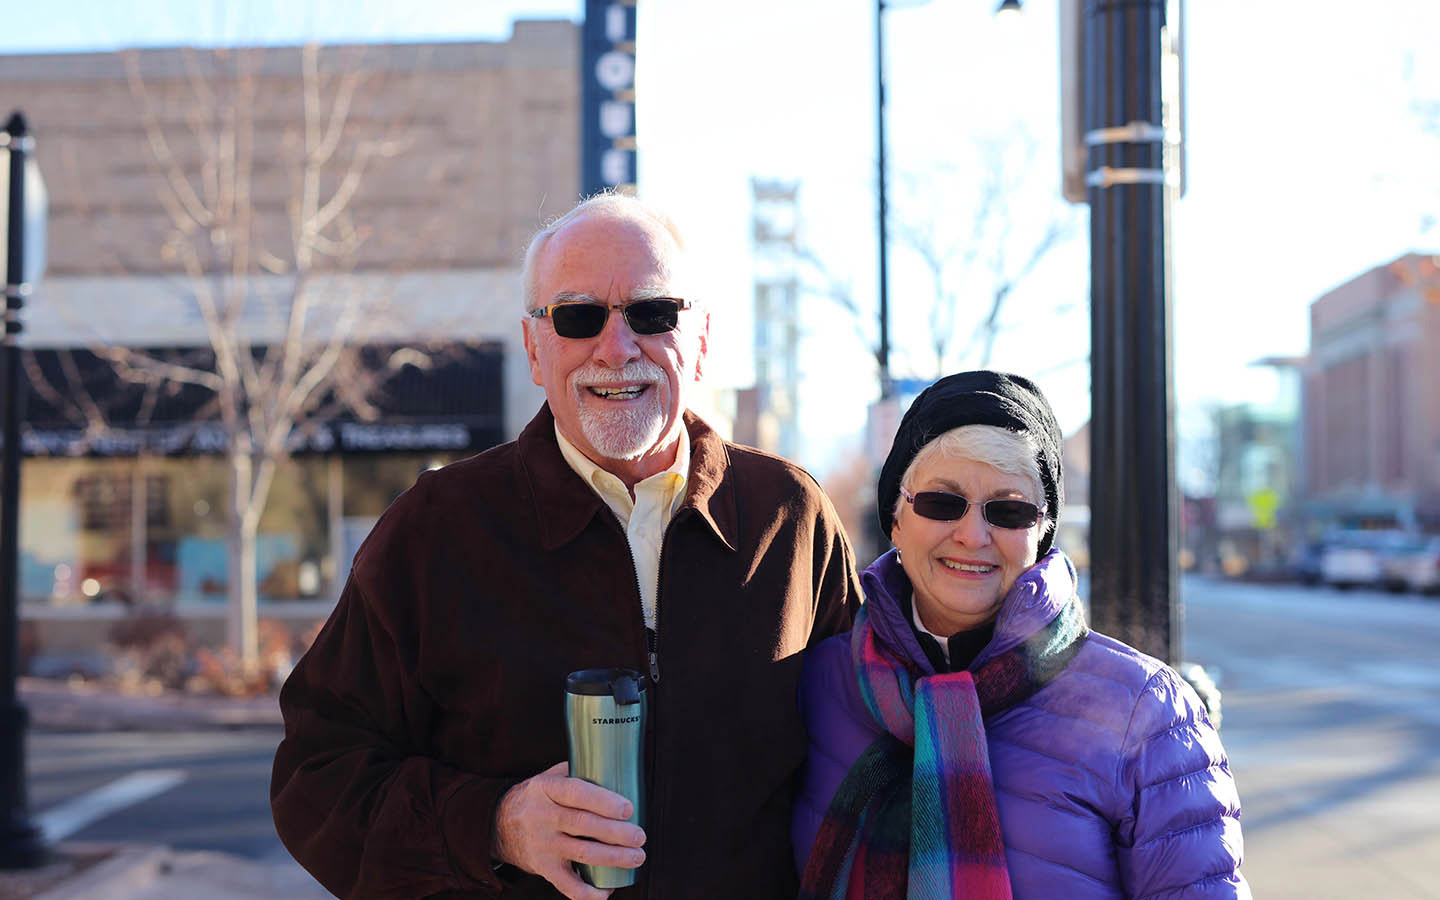 Cochlear recipient Tom and his wife Brenda pose for a photo on the street